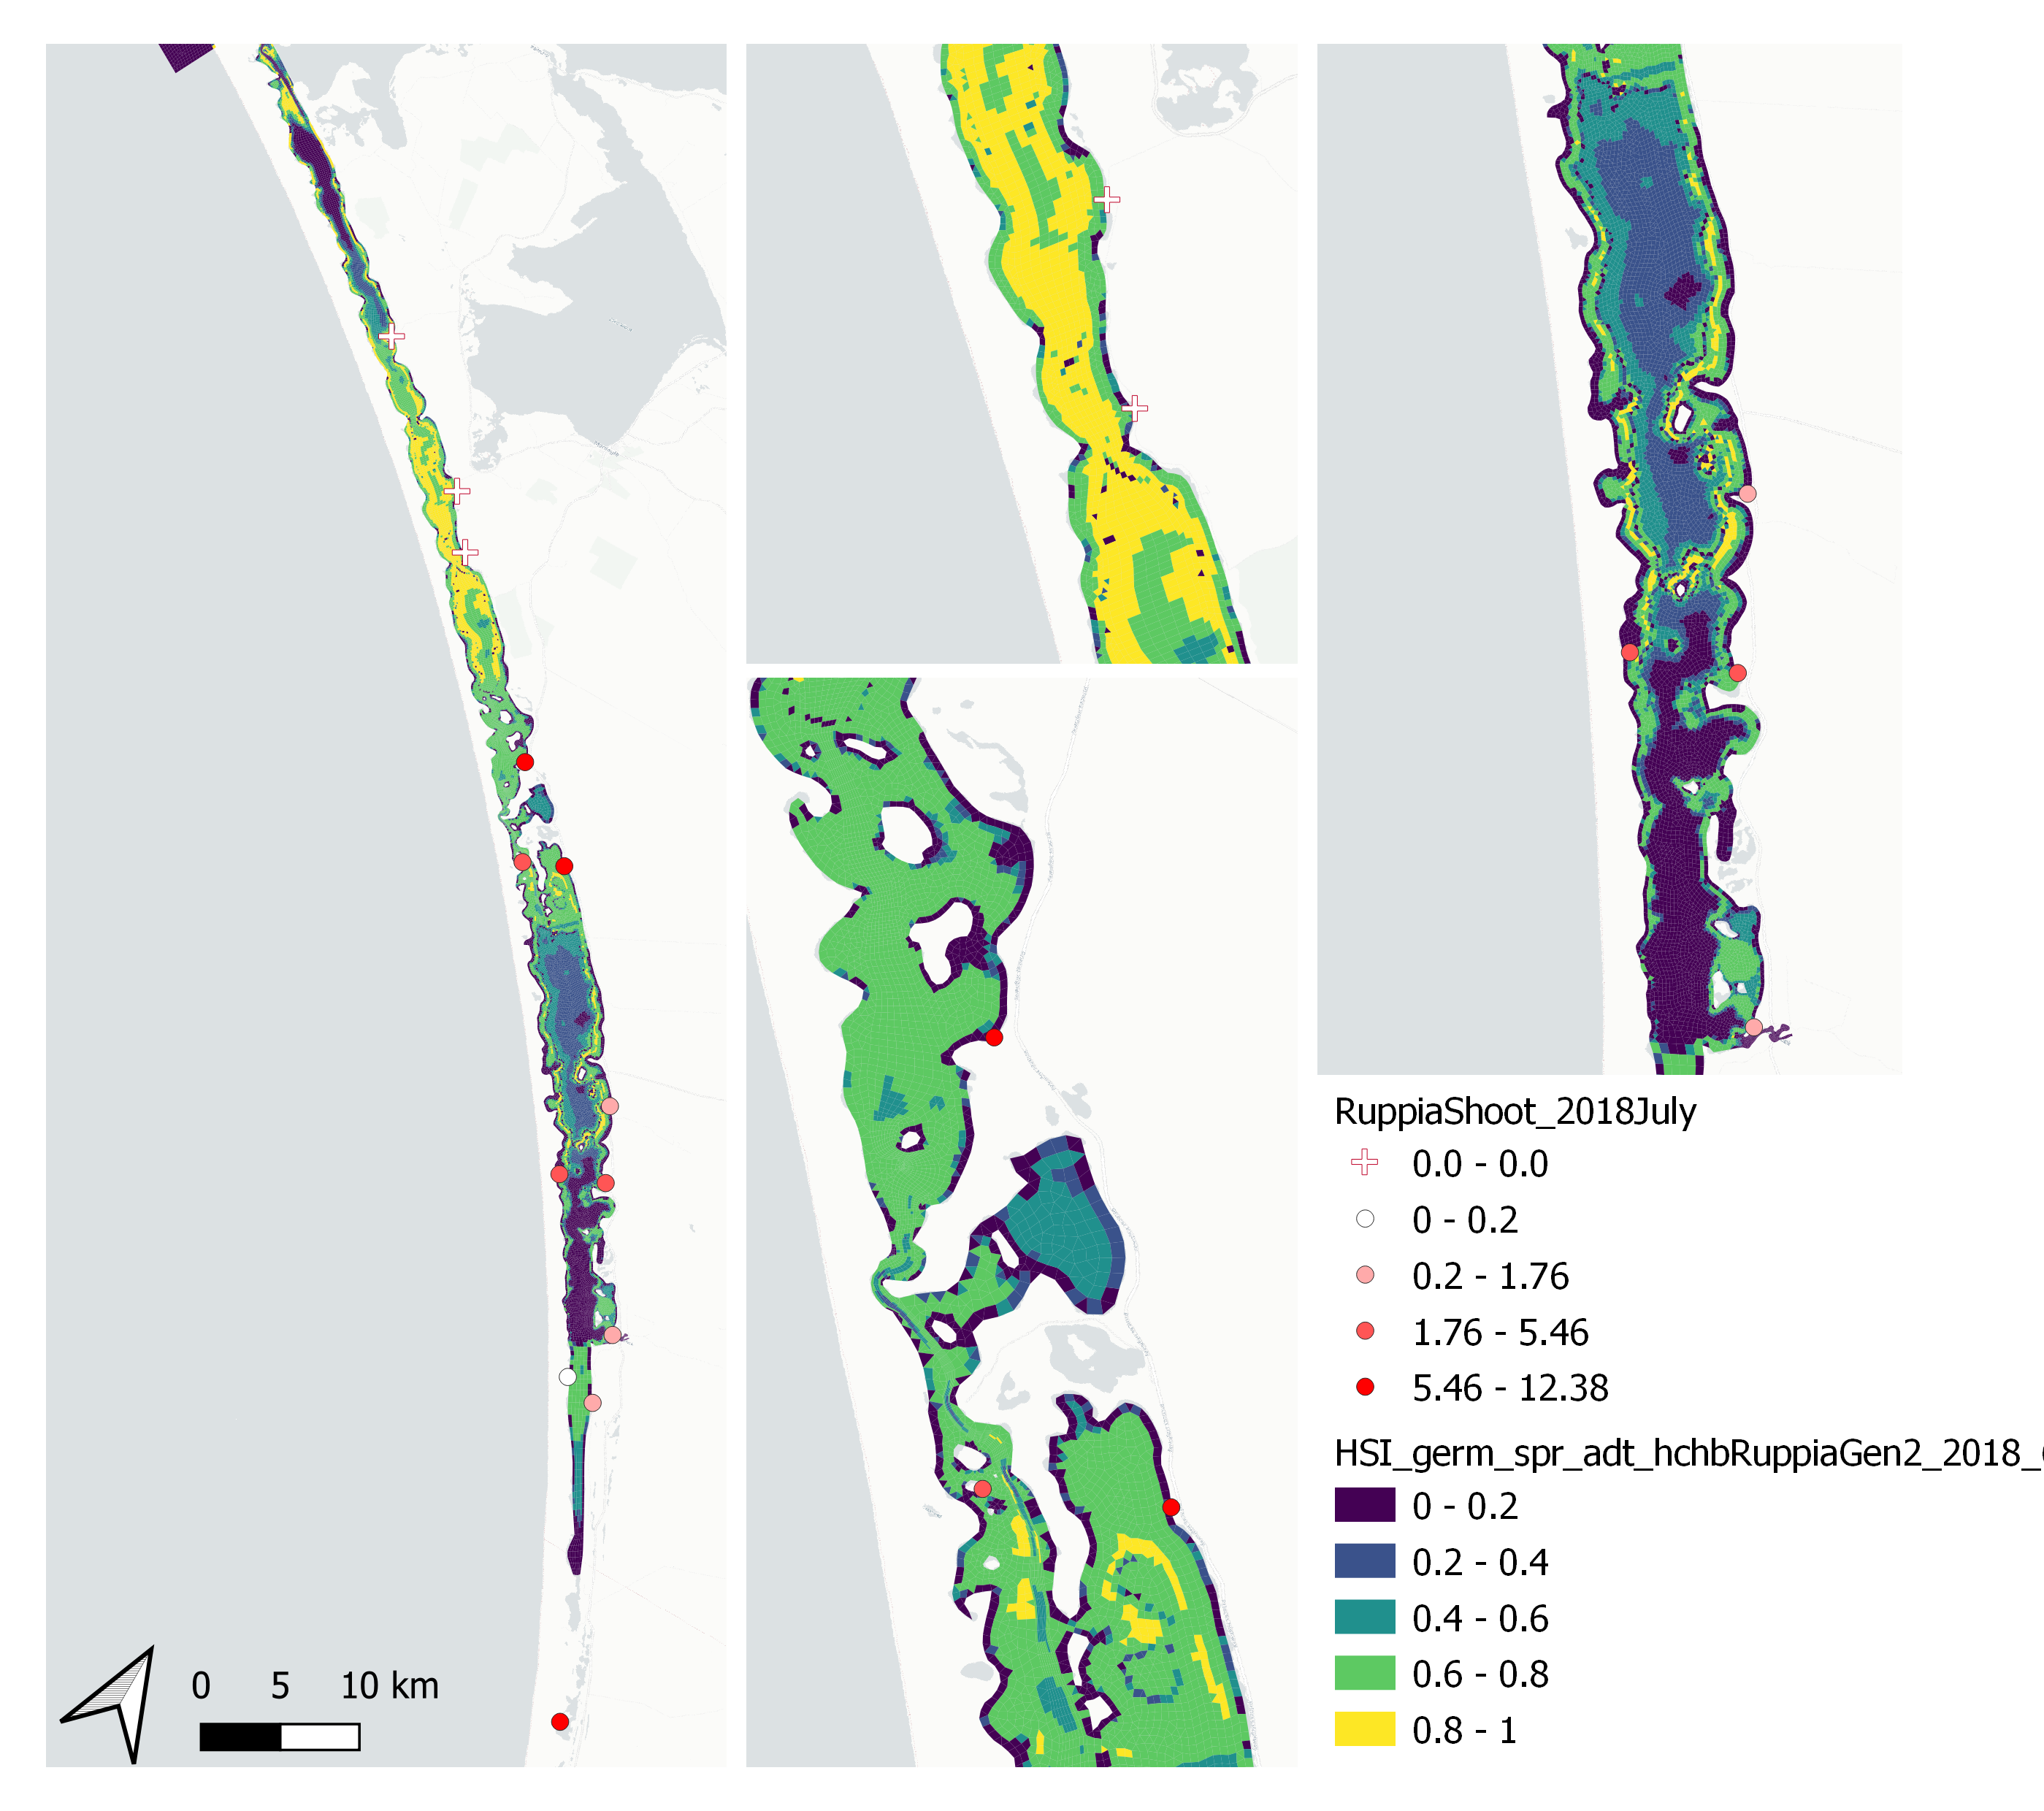 Average seagrass shoot count per 7.5 cm core in Jul 2018 (circles) overlaid on HSI model output for germination, sprouting and adult growth integrated over Jan – Jun 2018. An HSI of 0 (dark purple) represents unsuitable habitat conditions, while an HSI of 1 represents optimal conditions (yellow).